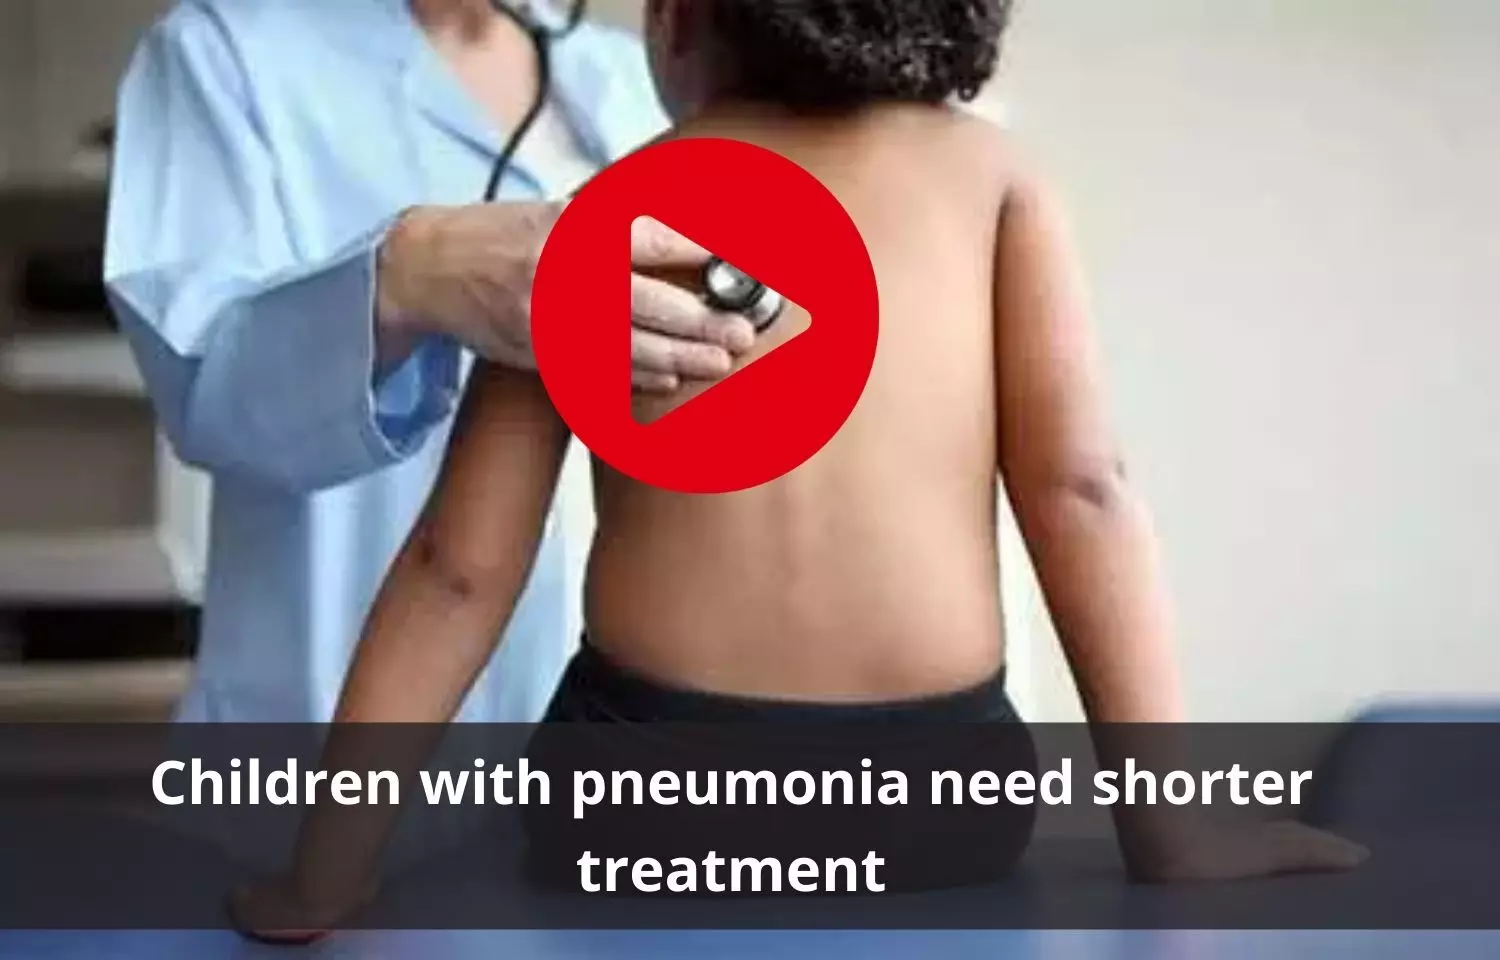 Pneumonia in children to have shorter treatment time than expected